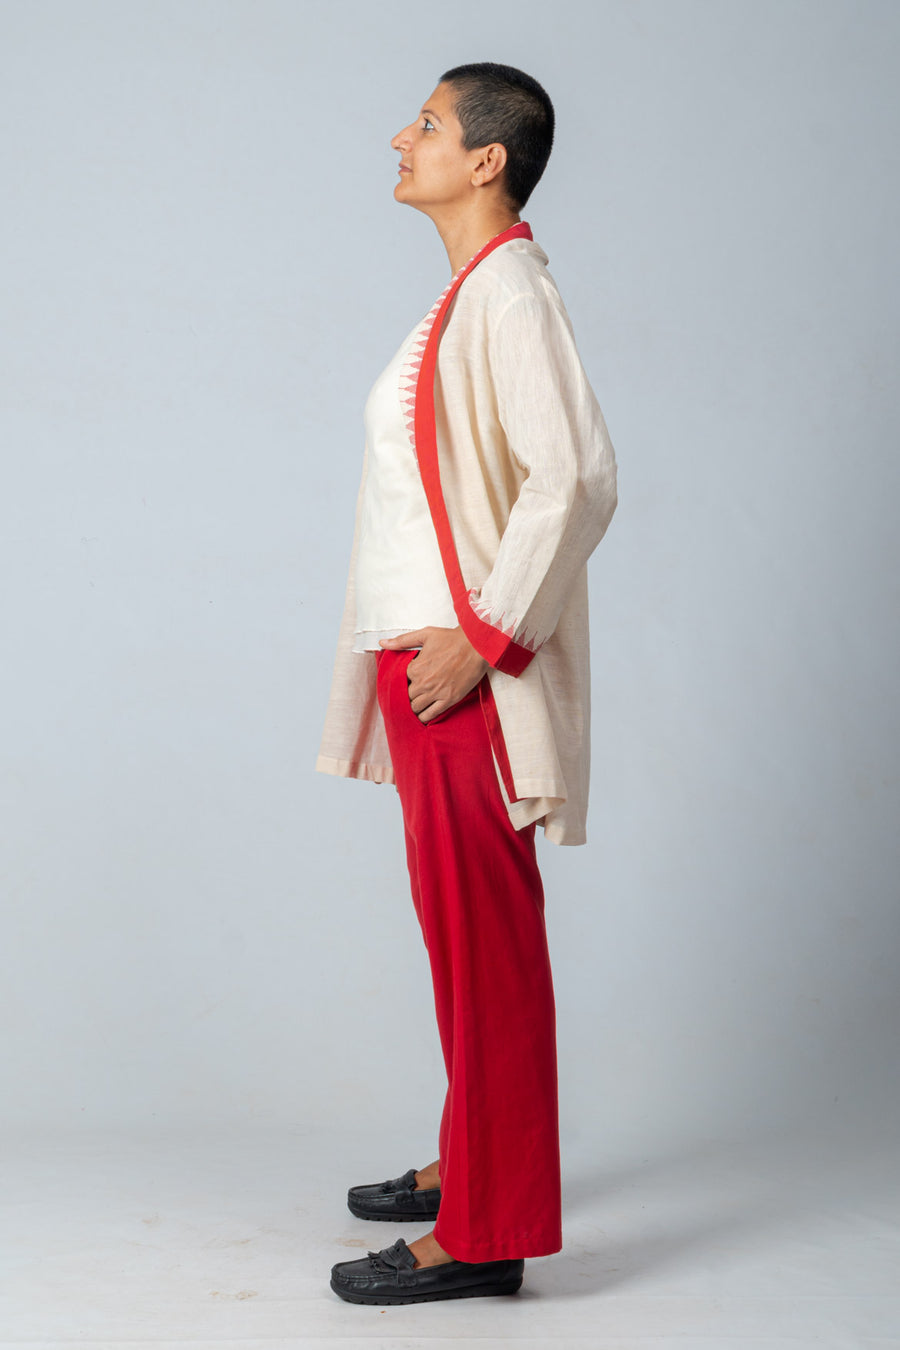 Off White Organic Cotton Top, Red Trousers and temple border jacket - JOWAKI SET